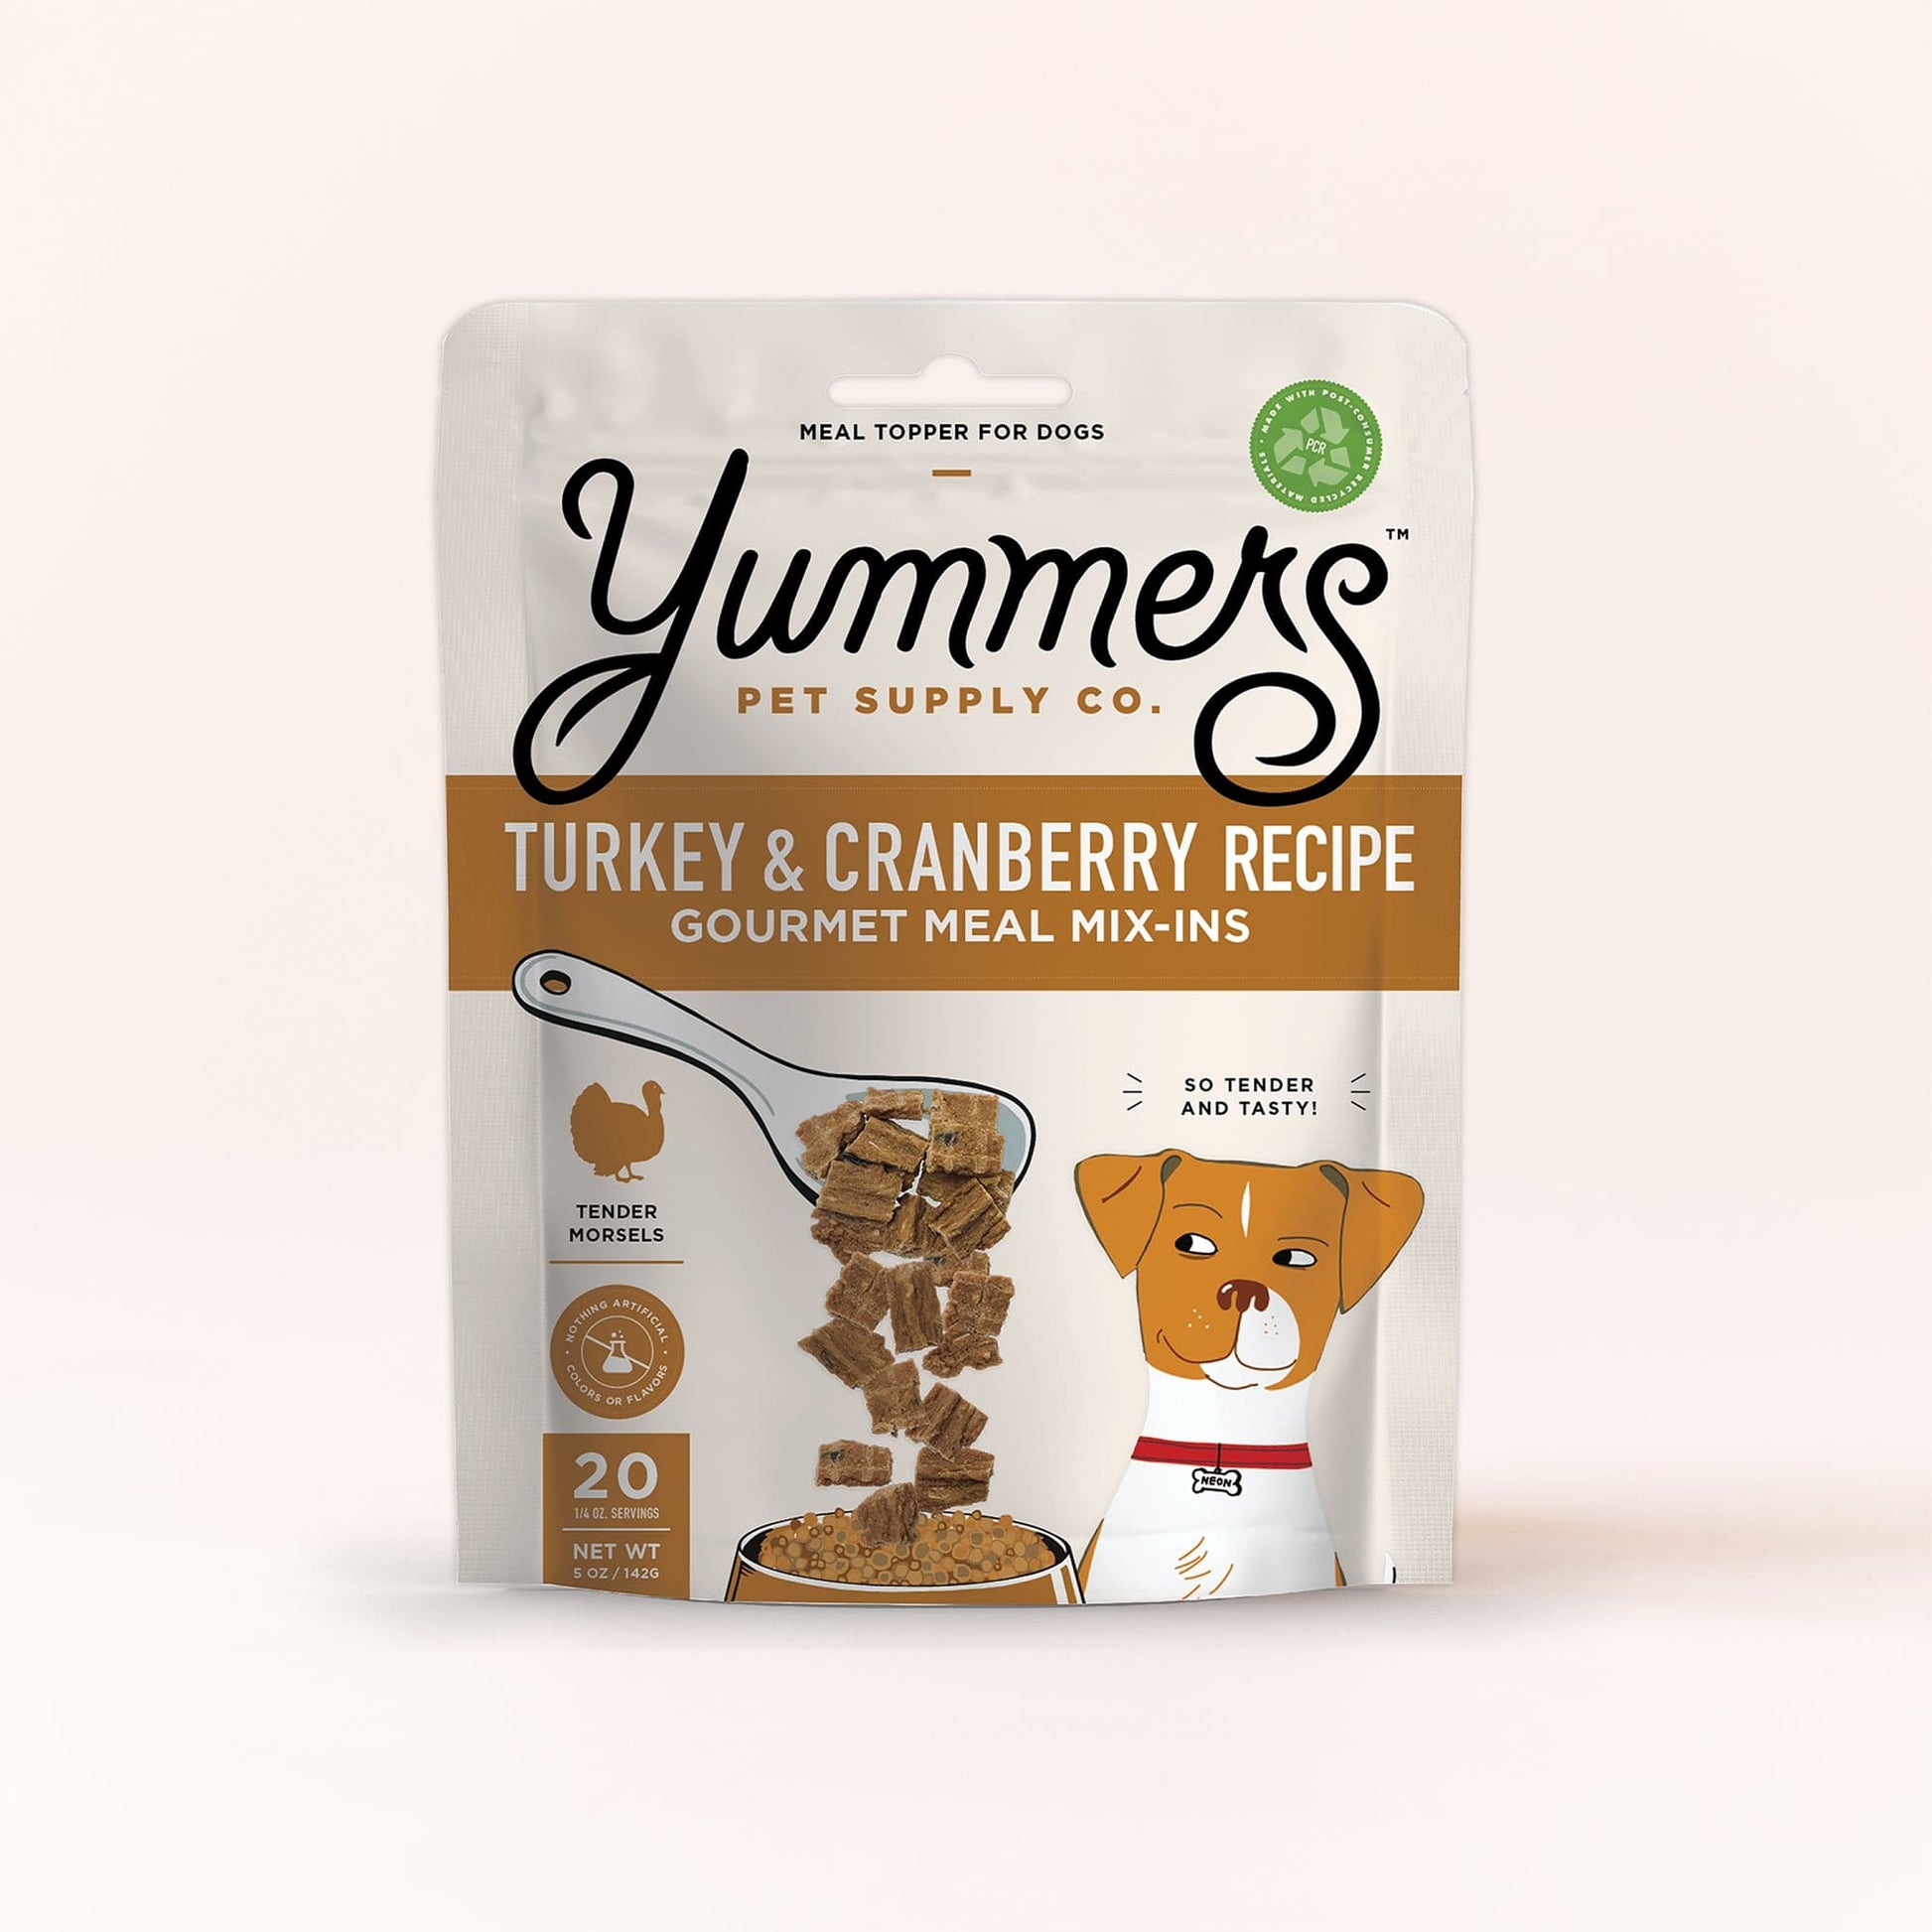 Turkey & Cranberry Recipe Gourmet Meal Mix-in for Dogs - front